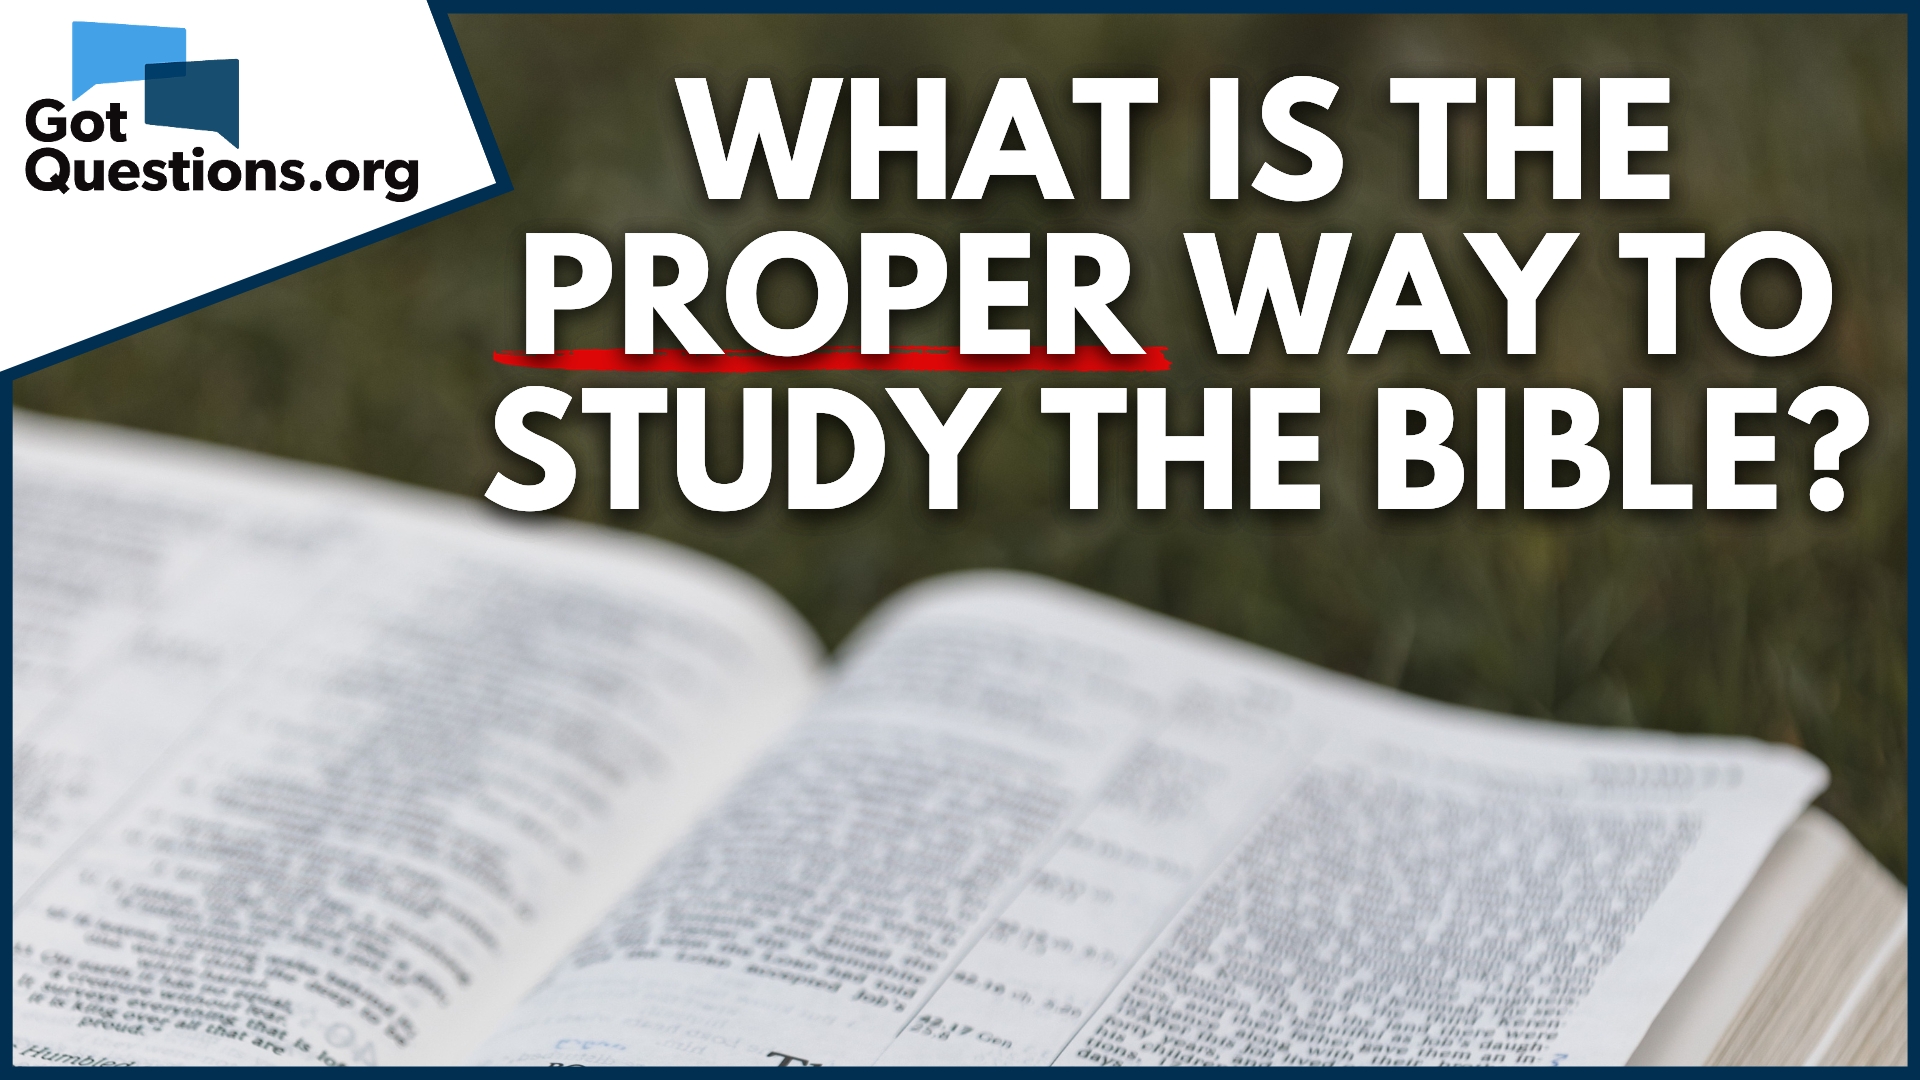 What is the proper way to study the Bible?